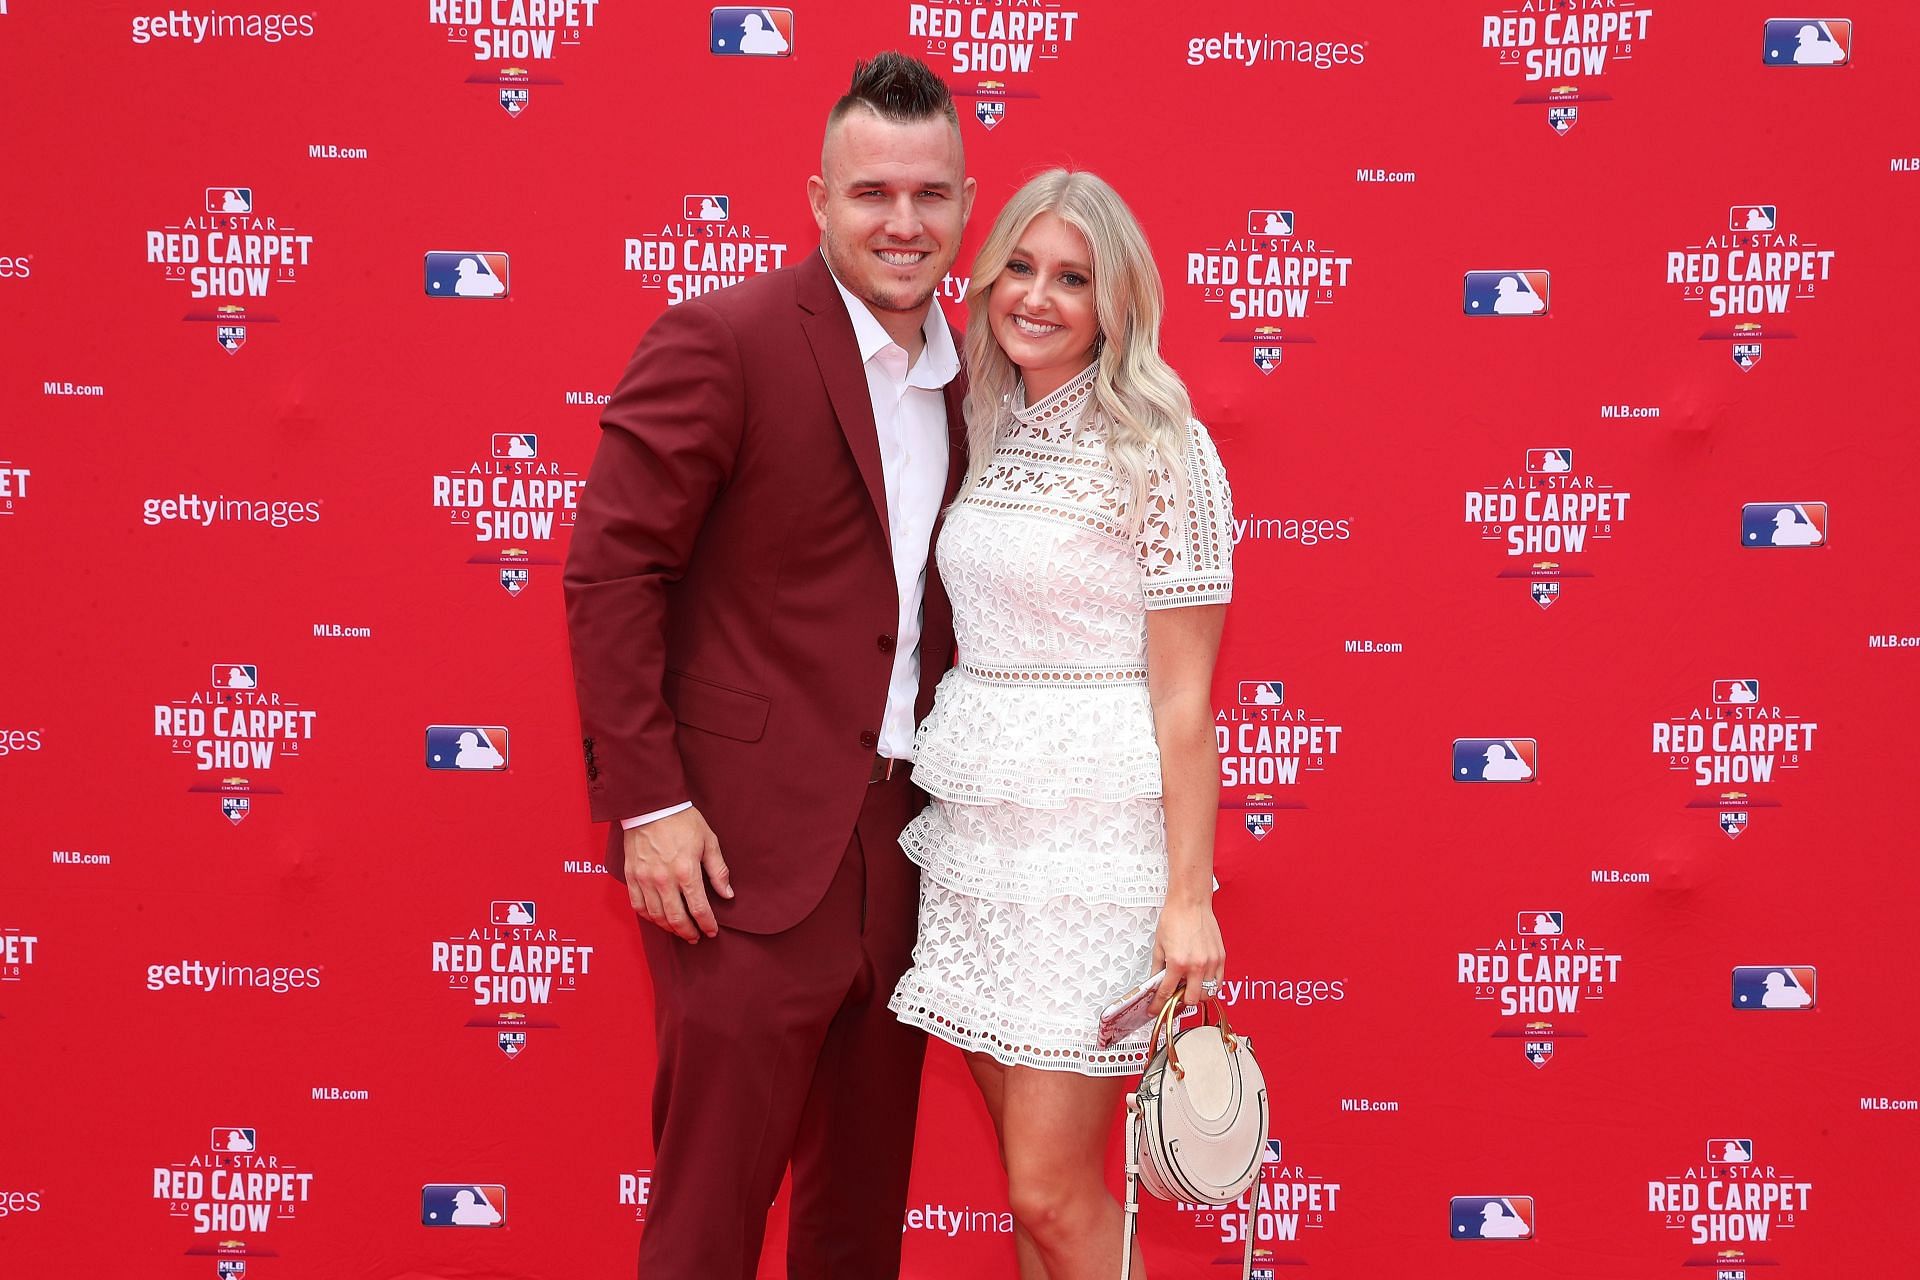 Mike Trout from the All-Star Red Carpet Show, red carpet